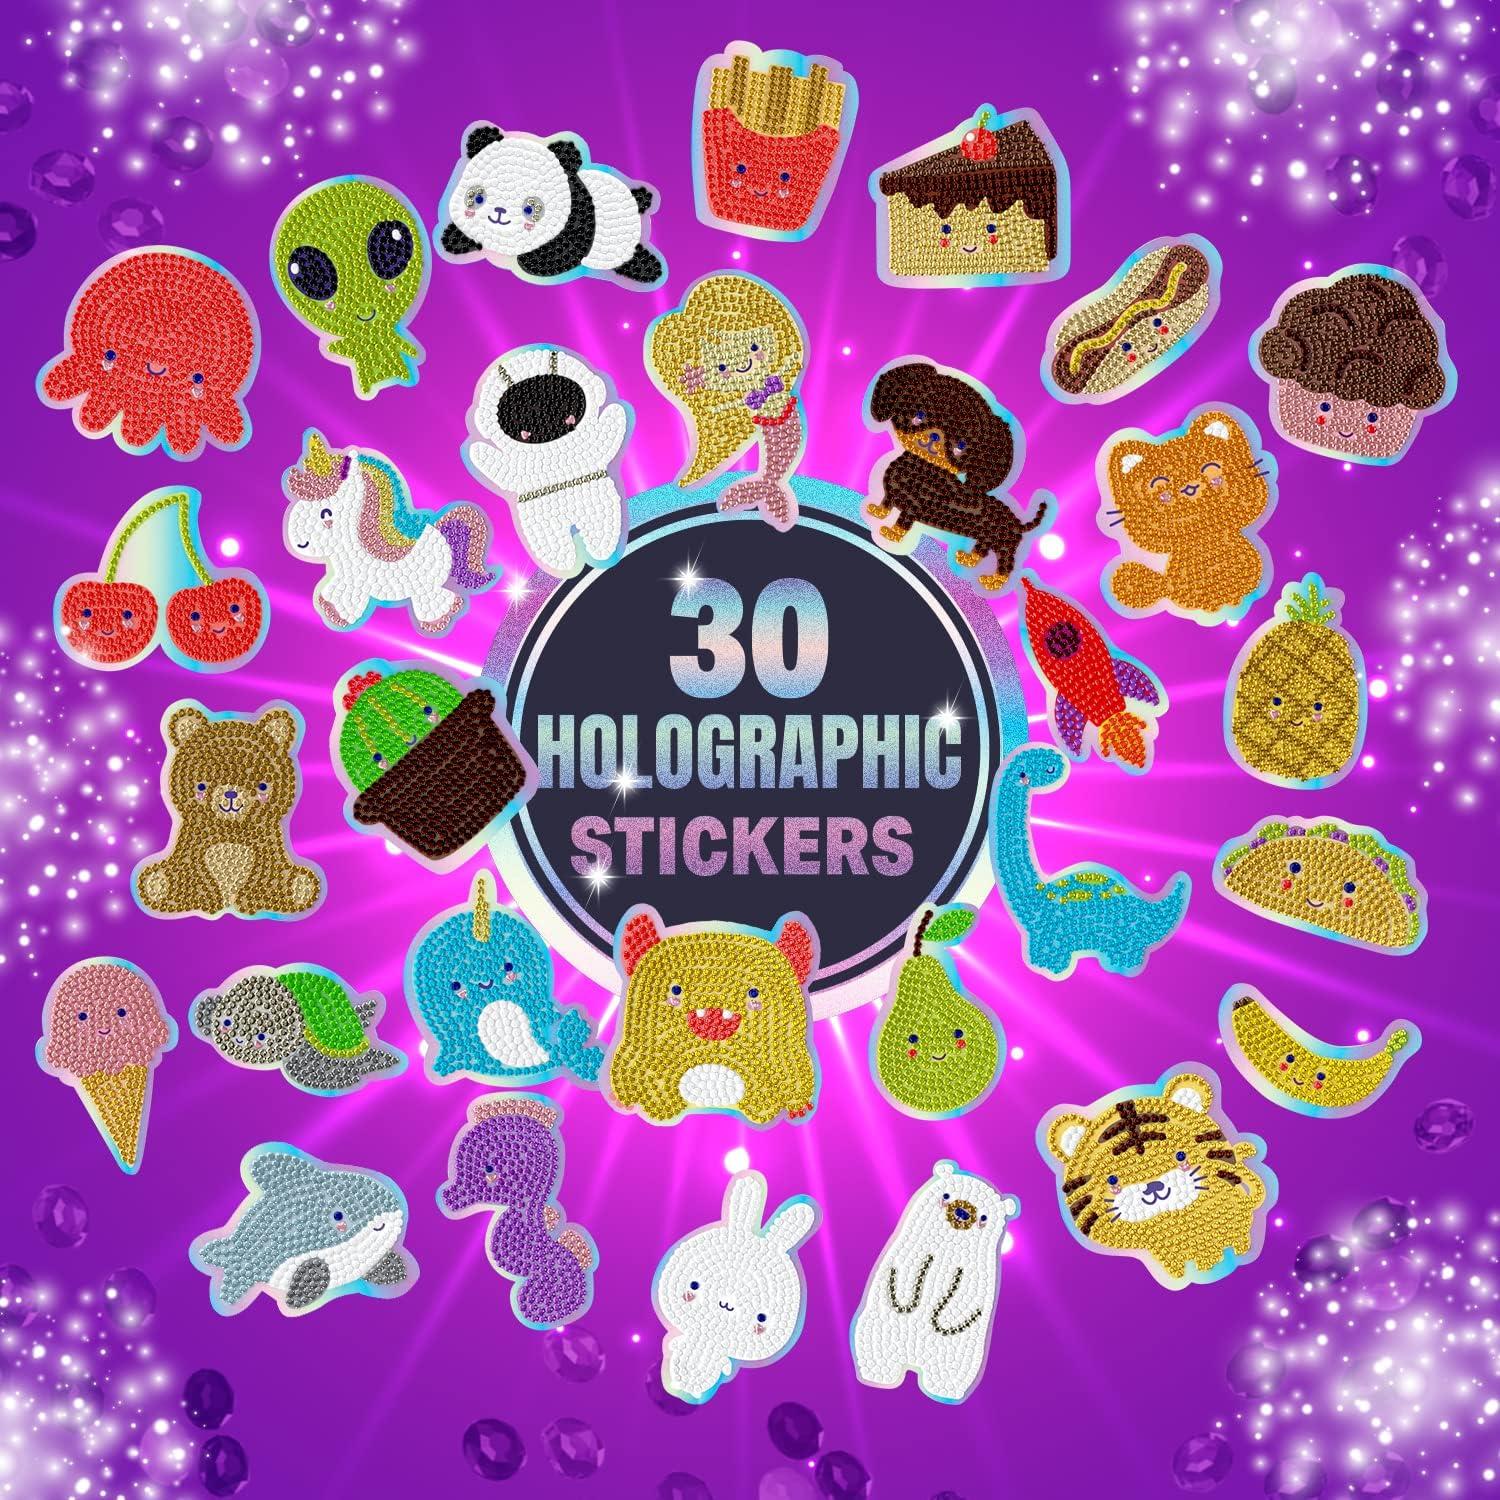 50pcs 5D Diamond Painting Stickers Kits for Kids - Cute Cartoon Toys Theme  - Arts and Crafts for Kids Ages 8-12 Being Creative to Gem DIY Diamond  Sticker to Be Kids' Birthday